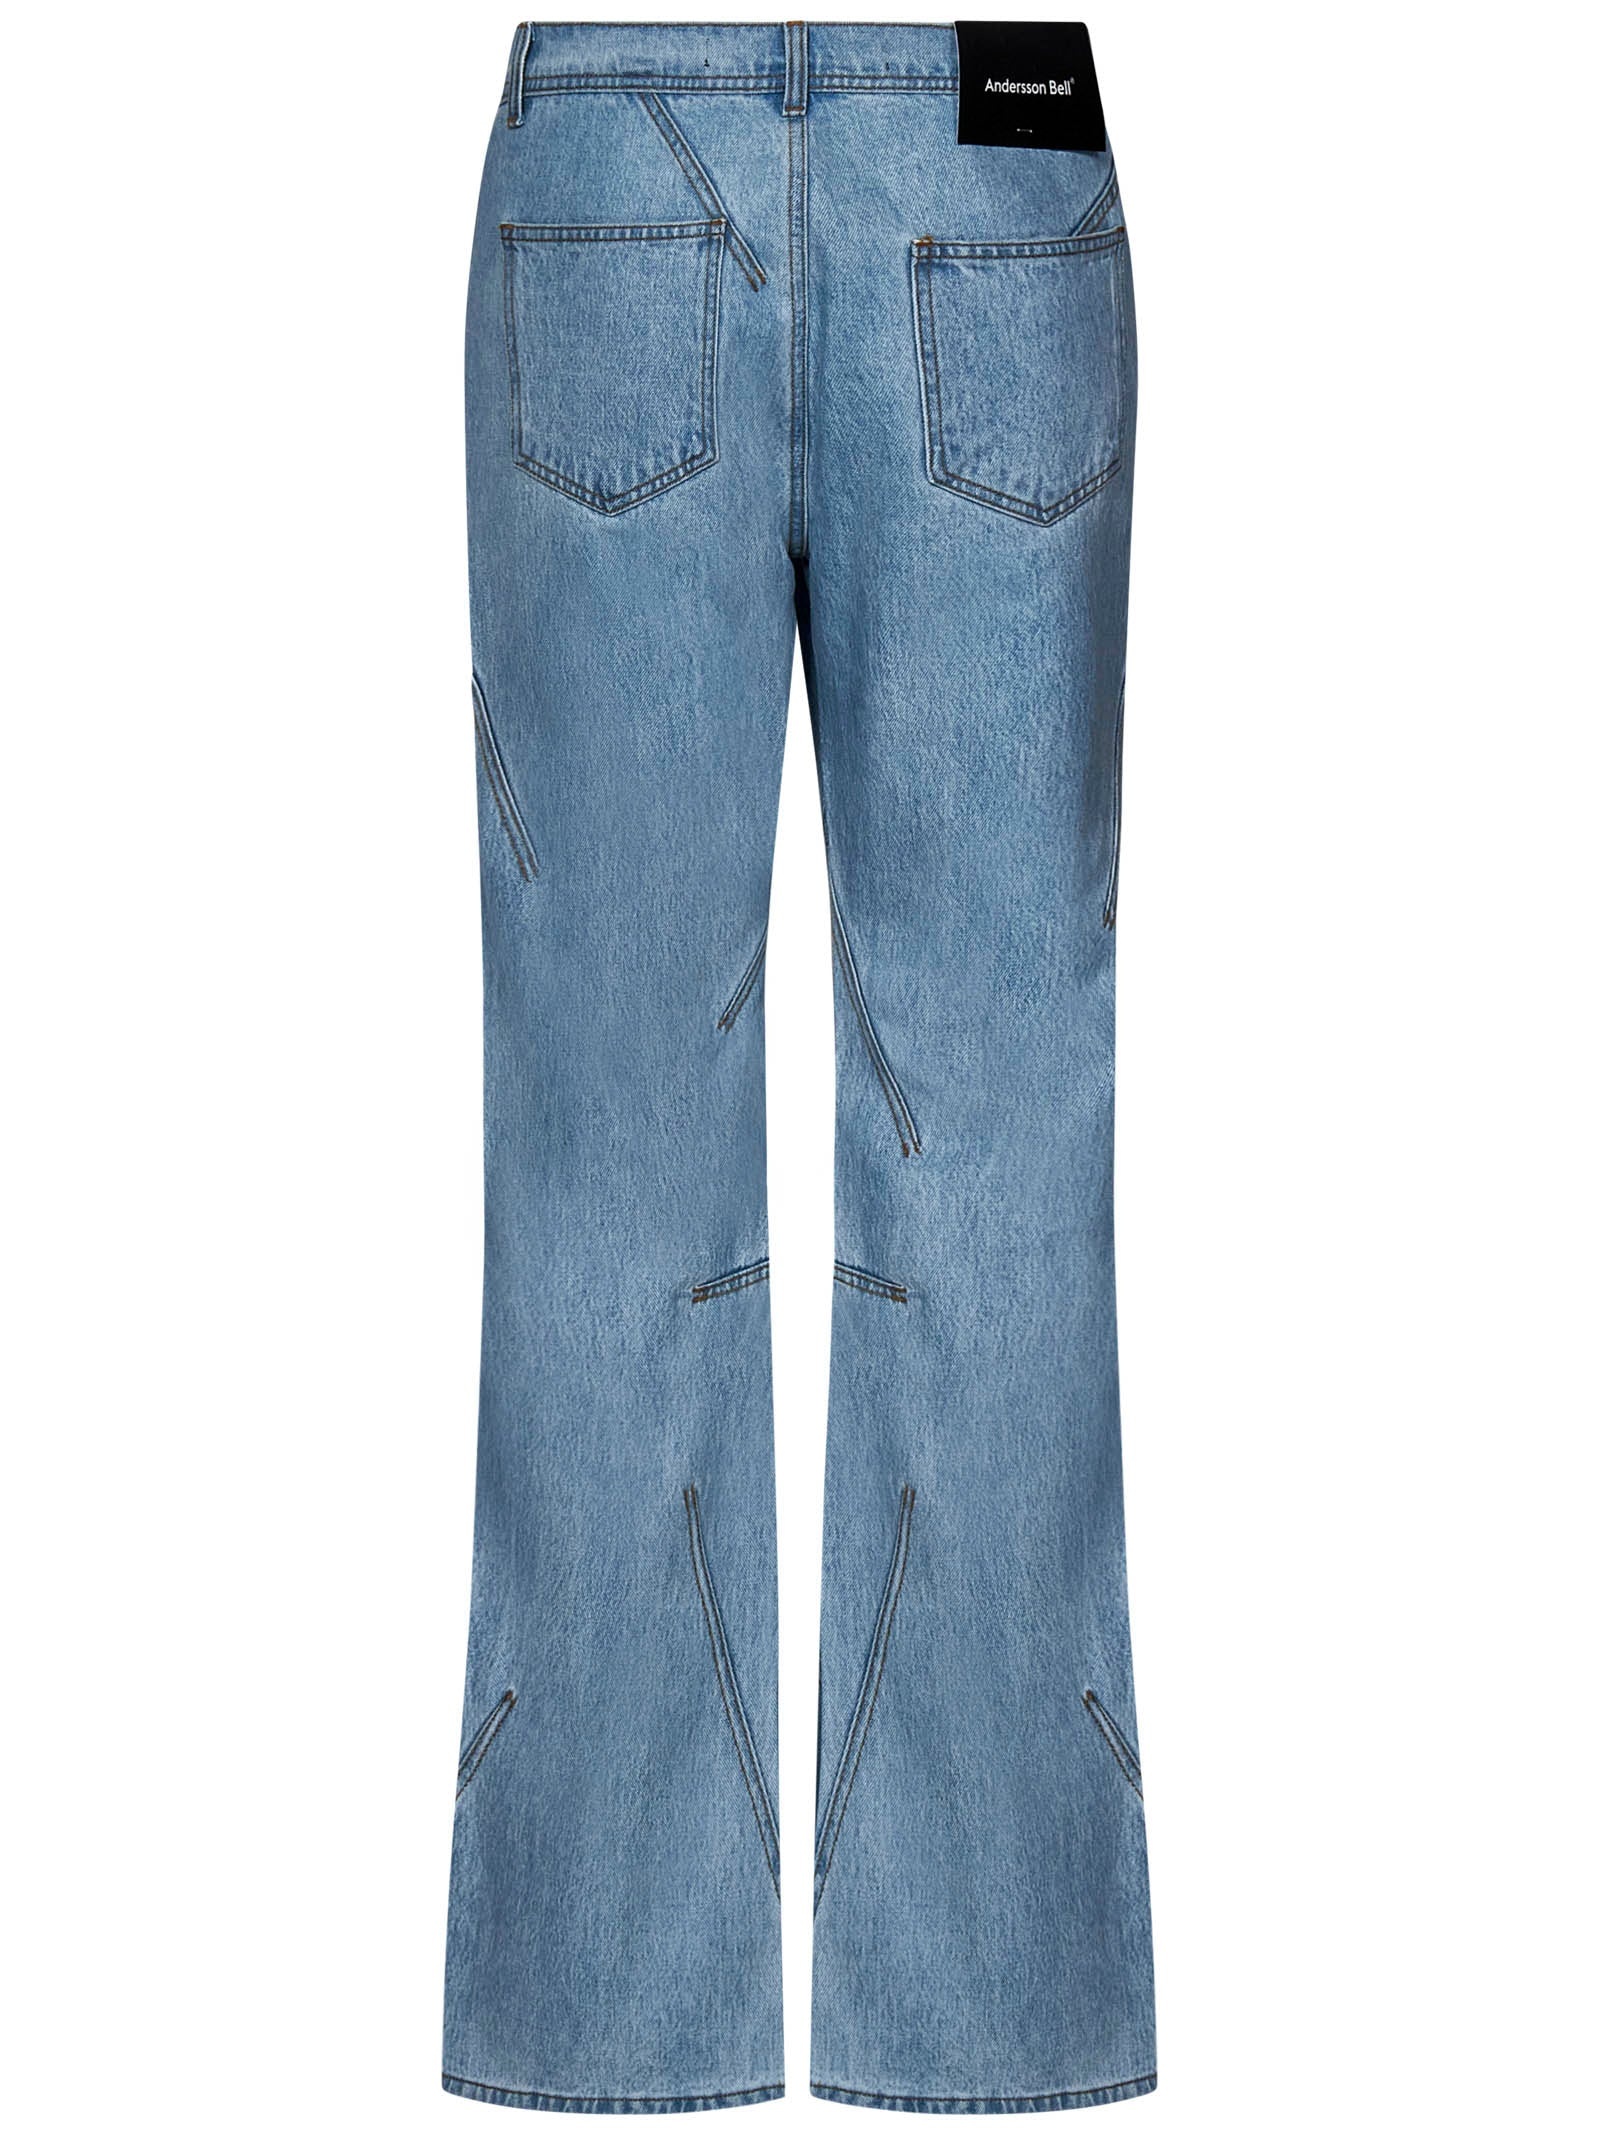 ANDERSSON BELL JEANS - 3